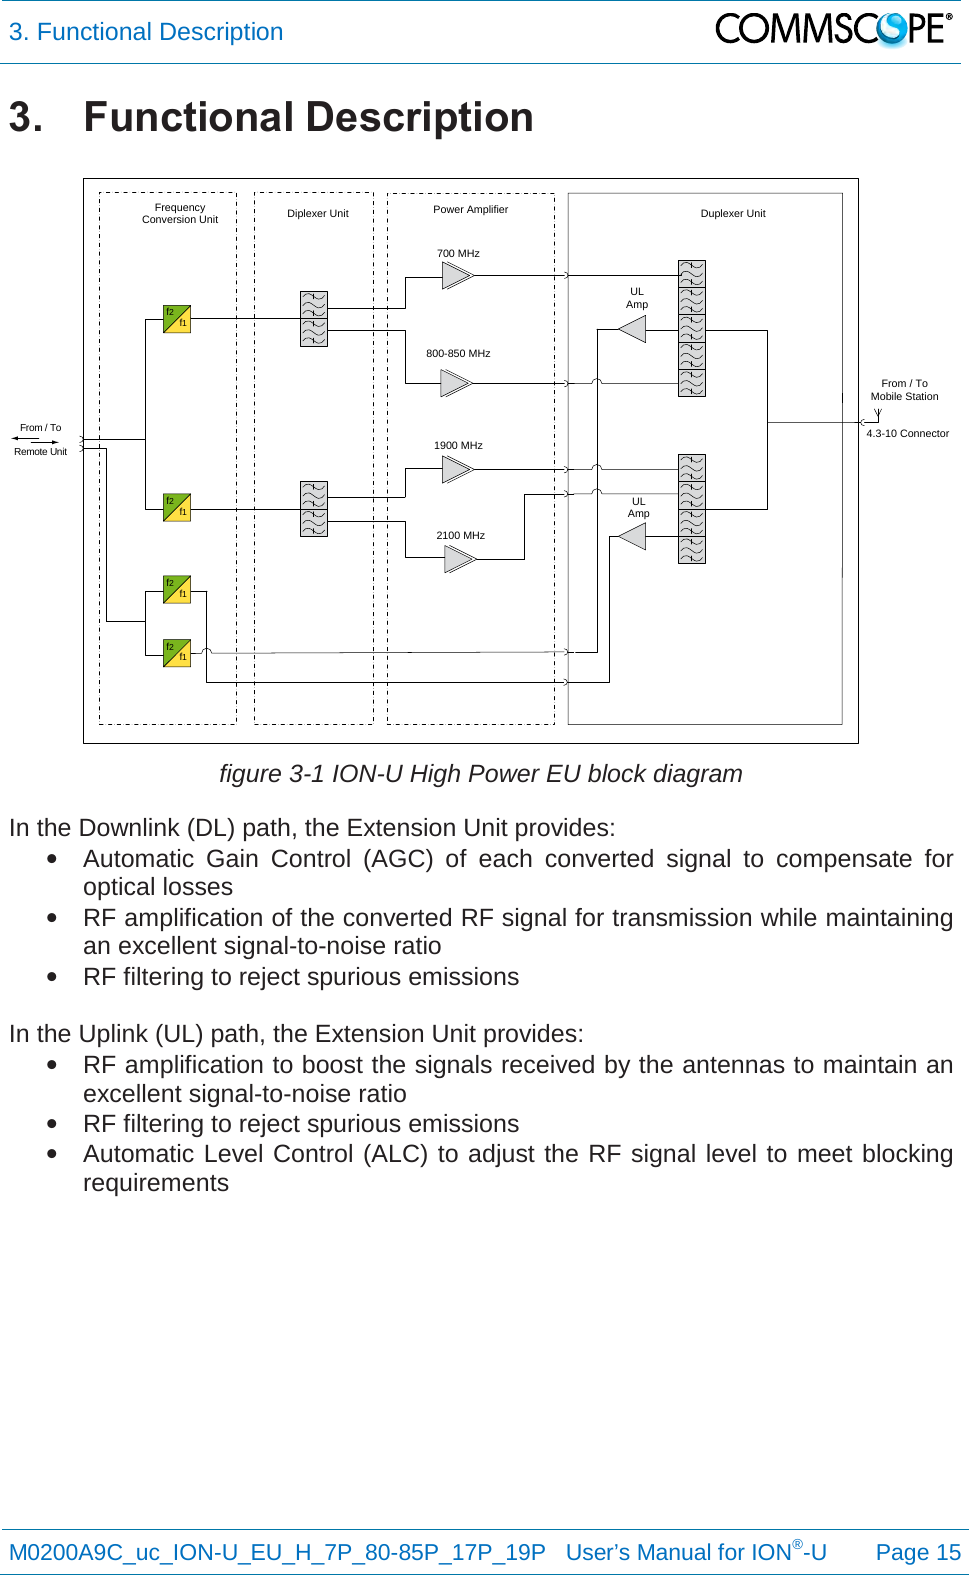 3. Functional Description   M0200A9C_uc_ION-U_EU_H_7P_80-85P_17P_19P   User’s Manual for ION®-U  Page 15  3. Functional Description   figure 3-1 ION-U High Power EU block diagram In the Downlink (DL) path, the Extension Unit provides: • Automatic Gain Control (AGC) of each converted signal to compensate for optical losses • RF amplification of the converted RF signal for transmission while maintaining an excellent signal-to-noise ratio • RF filtering to reject spurious emissions  In the Uplink (UL) path, the Extension Unit provides: • RF amplification to boost the signals received by the antennas to maintain an excellent signal-to-noise ratio • RF filtering to reject spurious emissions • Automatic Level Control (ALC) to adjust the RF signal level to meet blocking requirements    700 MHz800-850 MHz1900 MHzUL AmpFrom / ToMobile StationPower Amplifier Duplexer Unit4.3-10 ConnectorFrom / ToRemote Unit2100 MHzUL AmpDiplexer UnitFrequency Conversion Unitf2f1f2f1f2f1f2f1